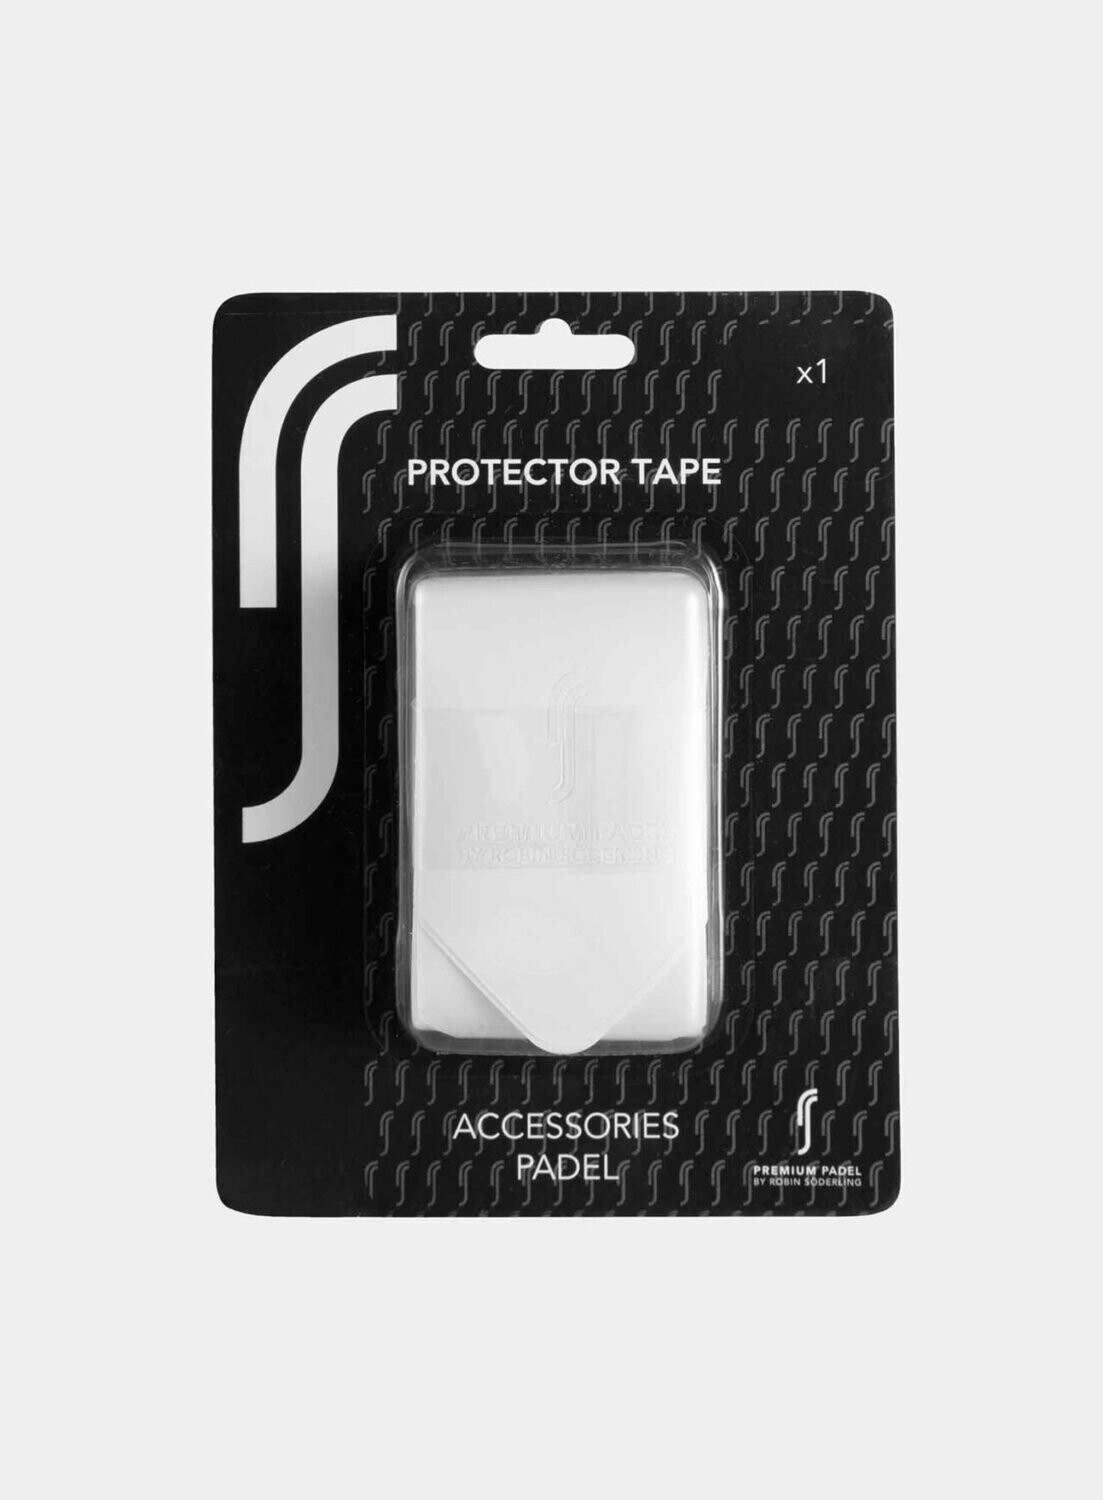 RS Protector Tape